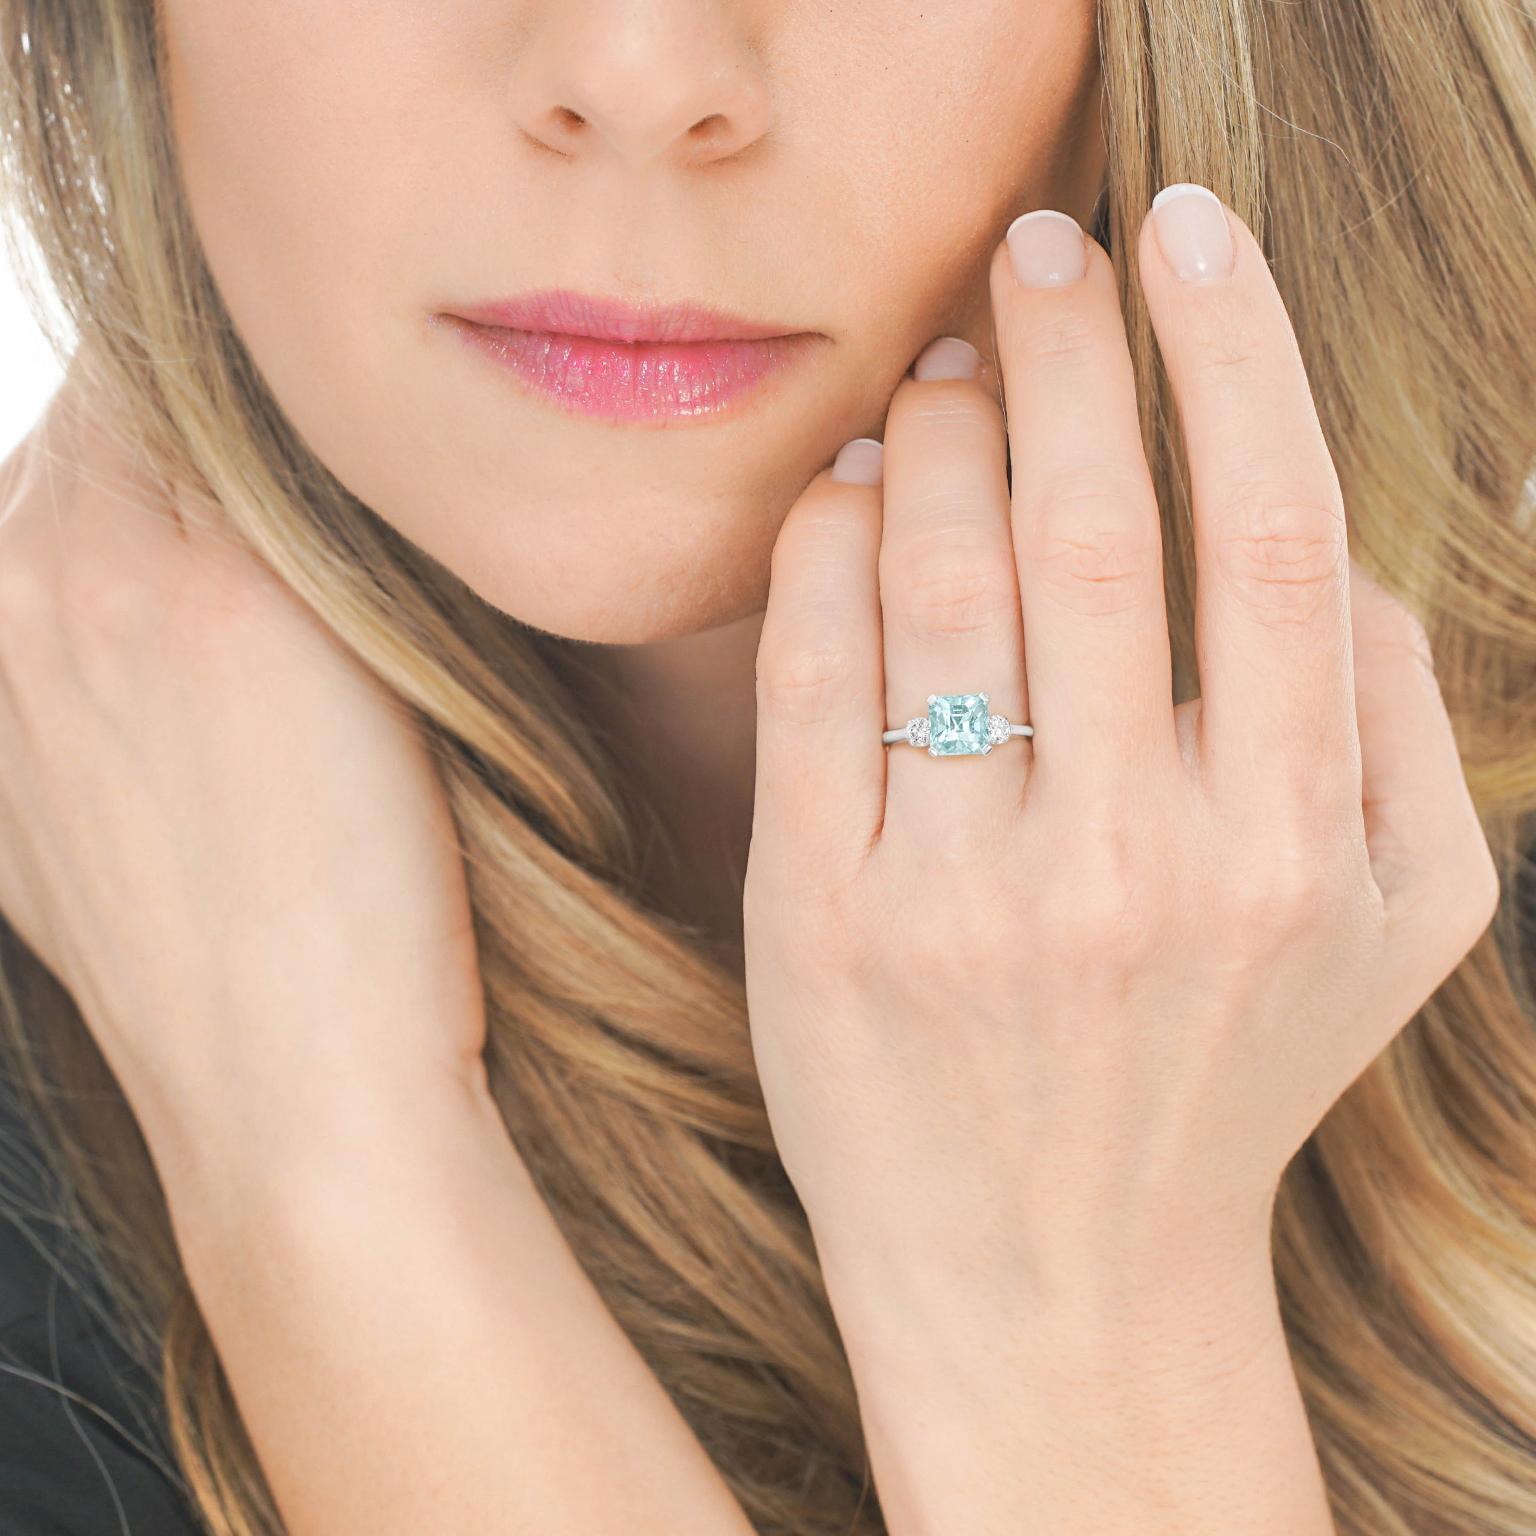 Circa 1950s, Platinum, American.   This colorful fifties platinum ring features a beautifully-hued 3.50 carat aquamarine accented by two fine white diamonds (.24cttw H color and SI1 clarity). The look is elegantly everyday, perfect for any moment of